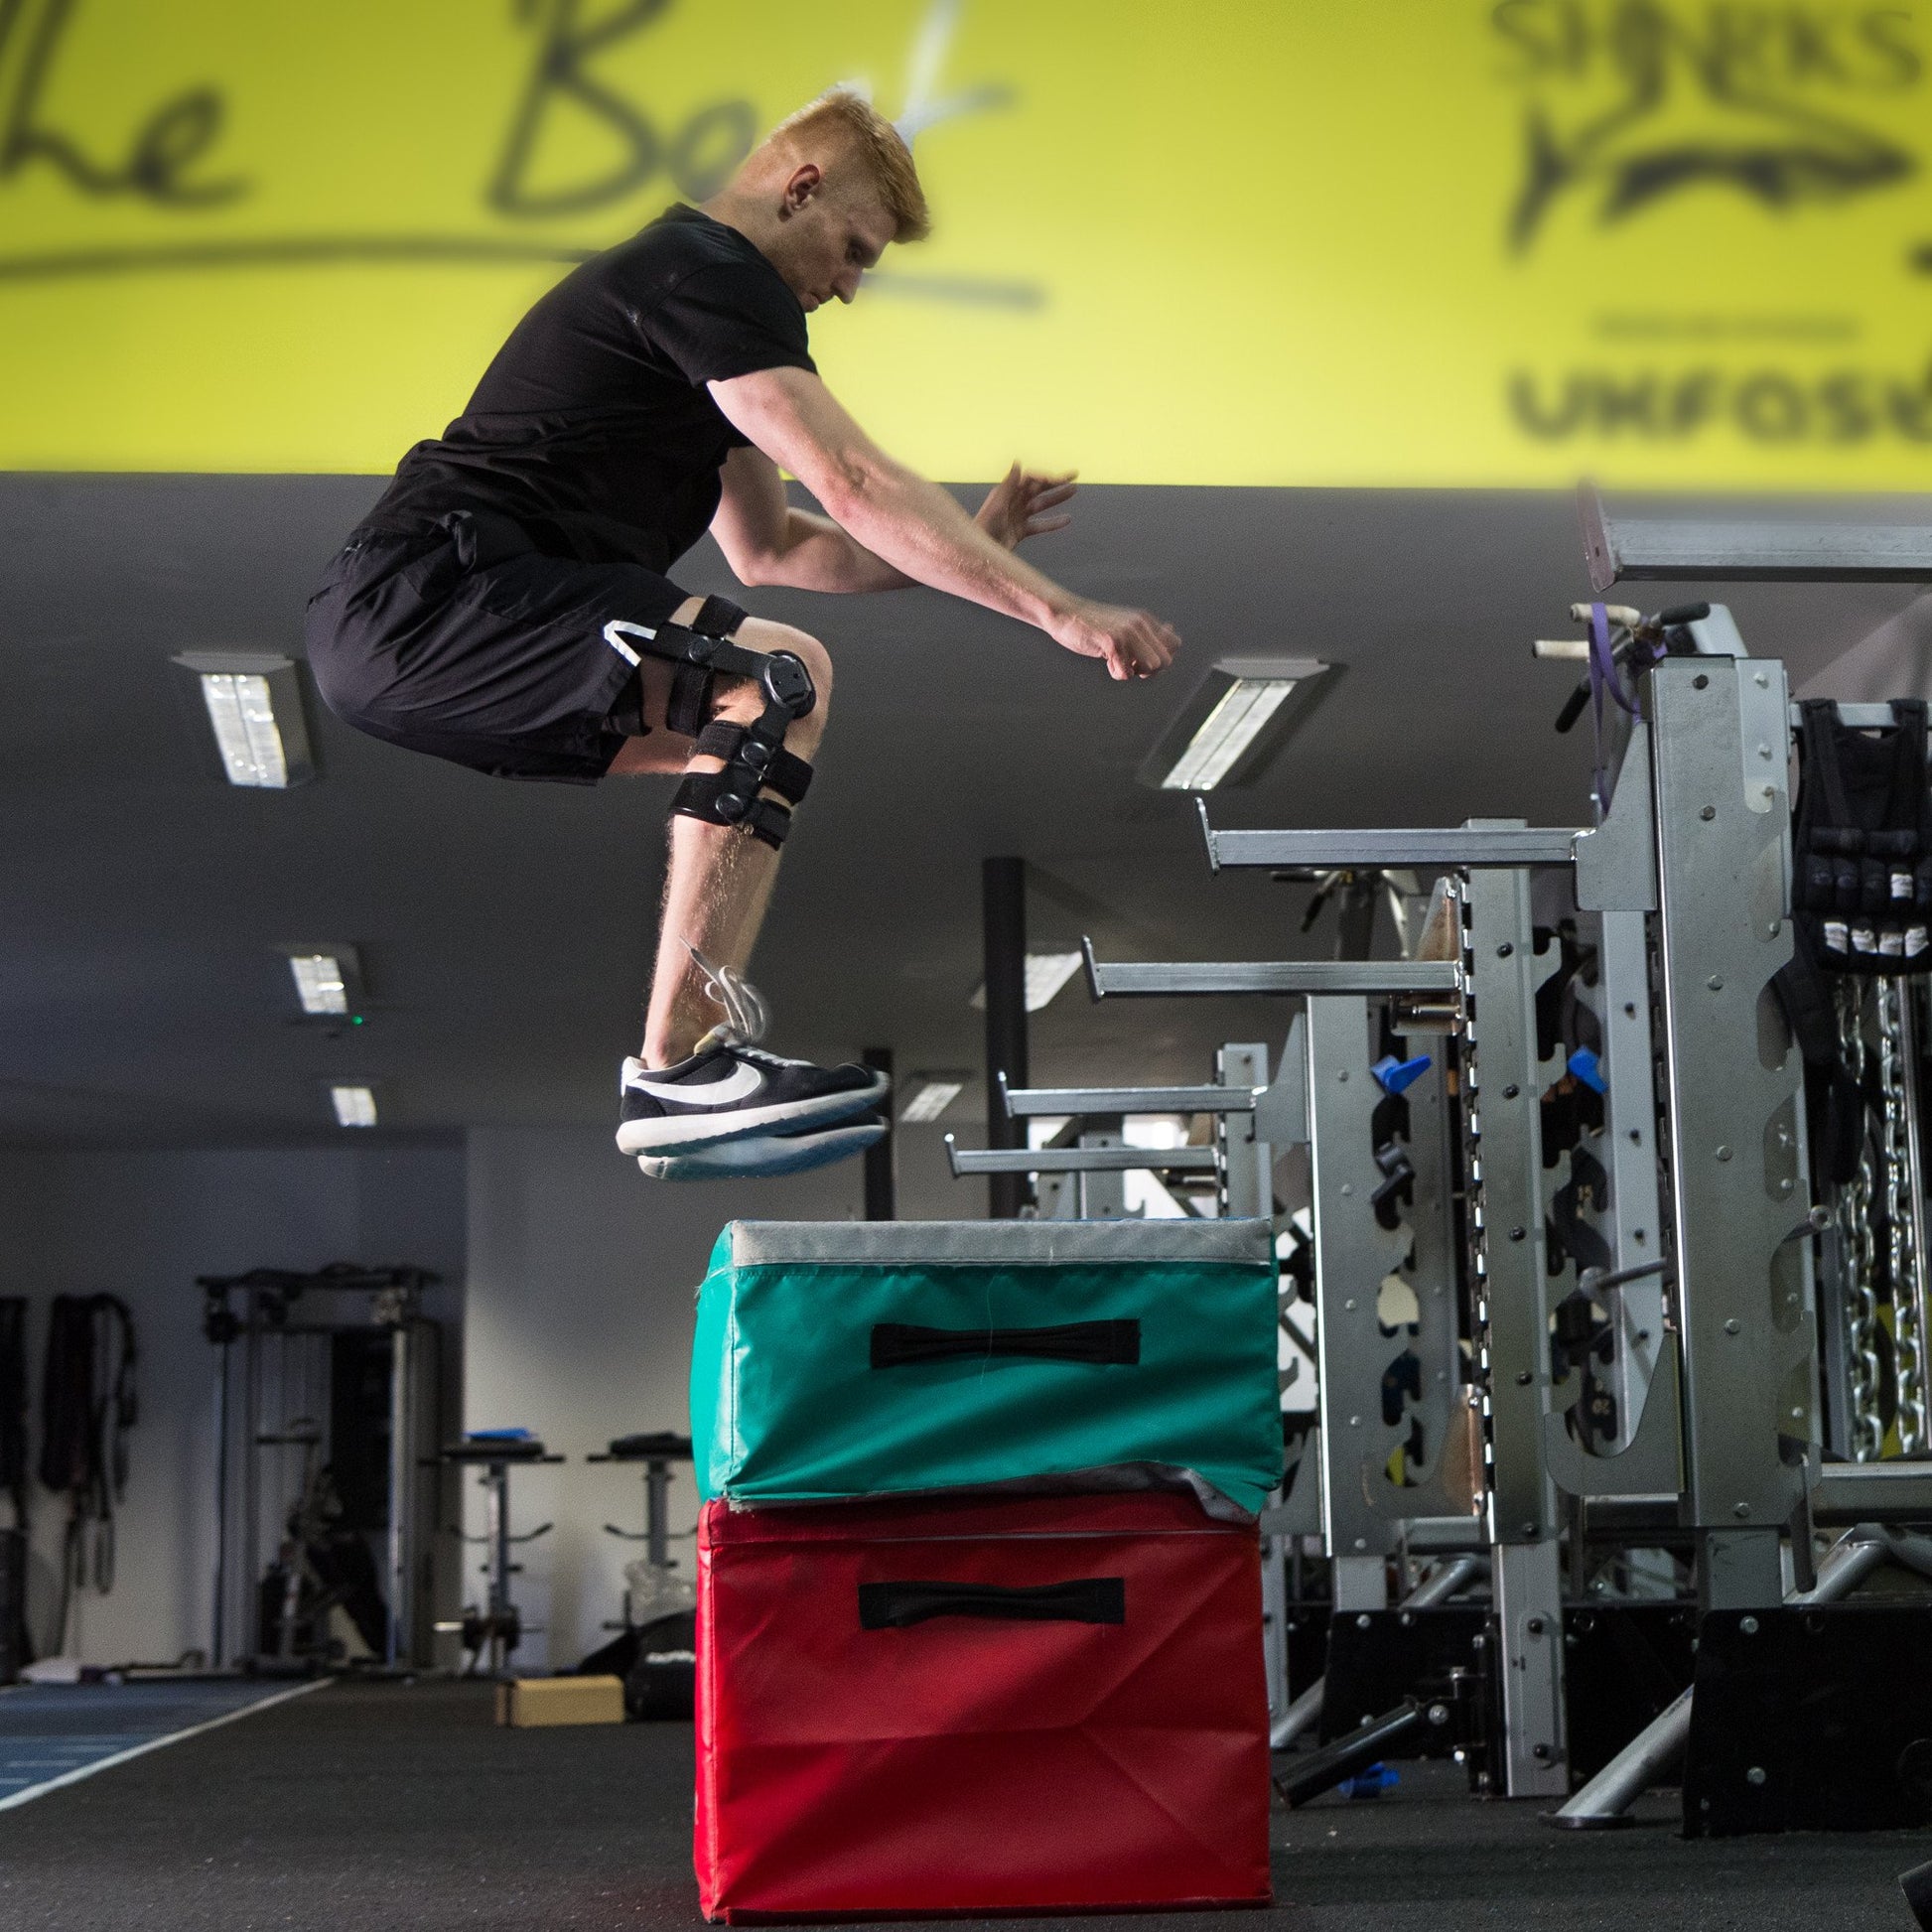 Athlete doing box jump wearing the Benecare Pro Action Knee Brace.